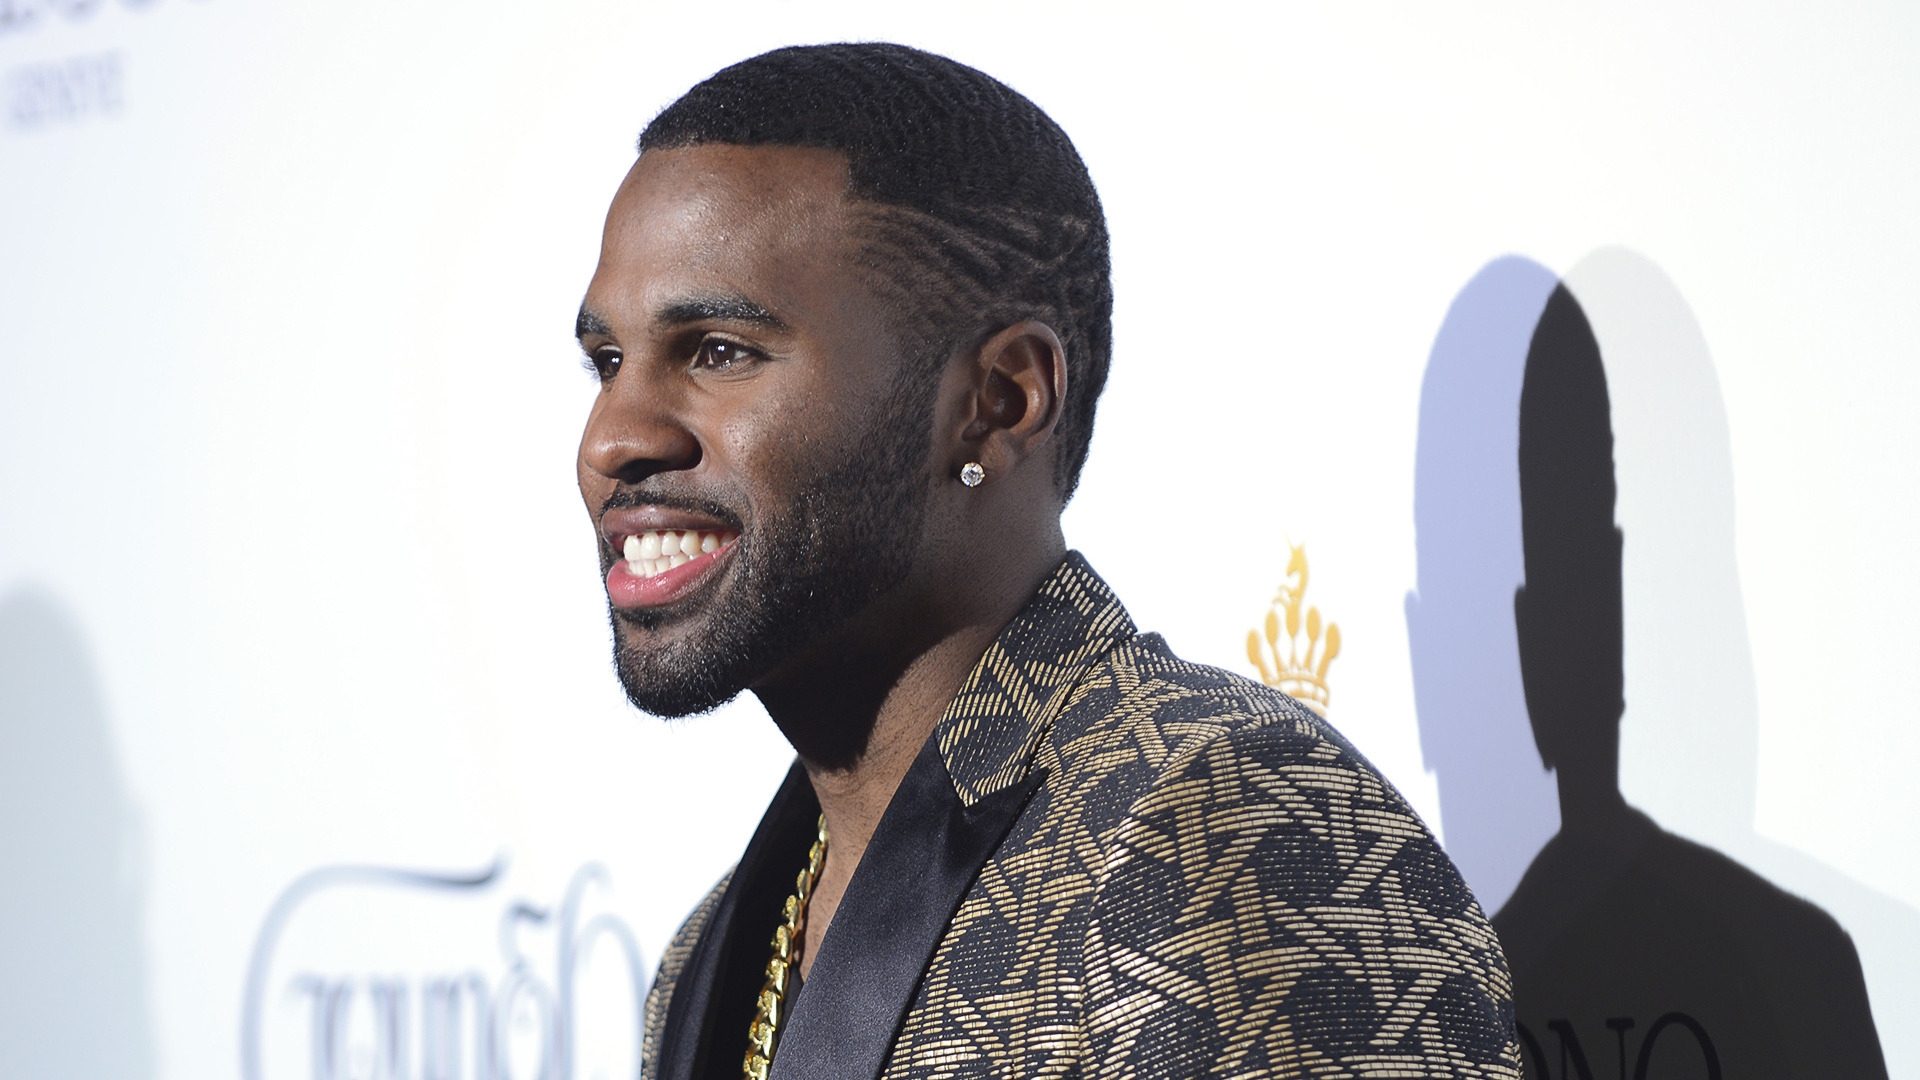 Jason Derulo at Cannes for 1920 x 1080 HDTV 1080p resolution